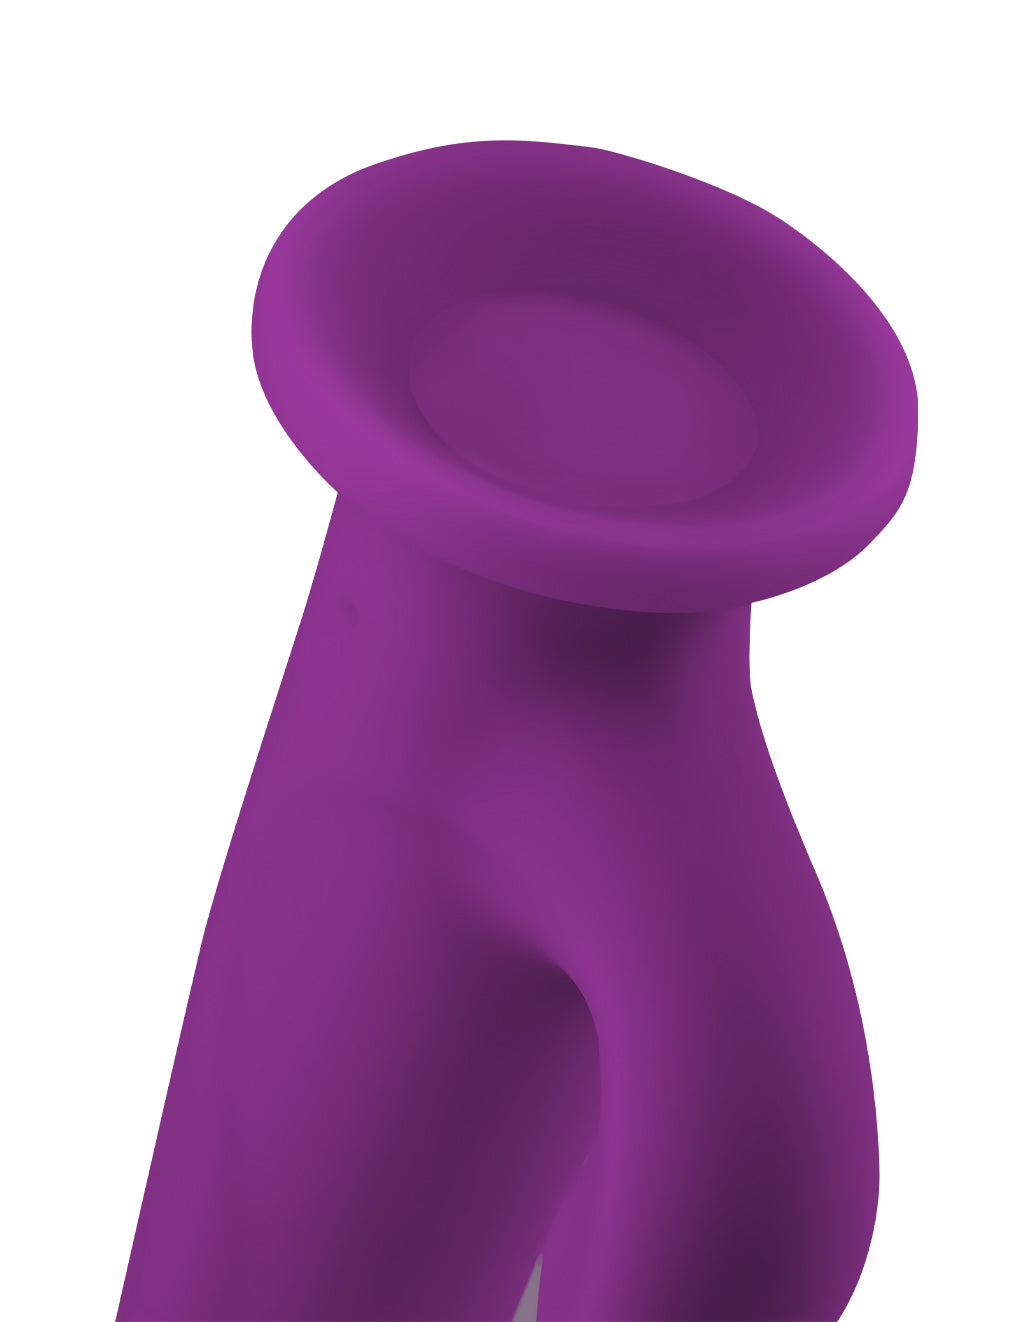 Femme Funn Pirouette Dual Stimulating Suction Cup Vibrator- Purple- Suction Cup